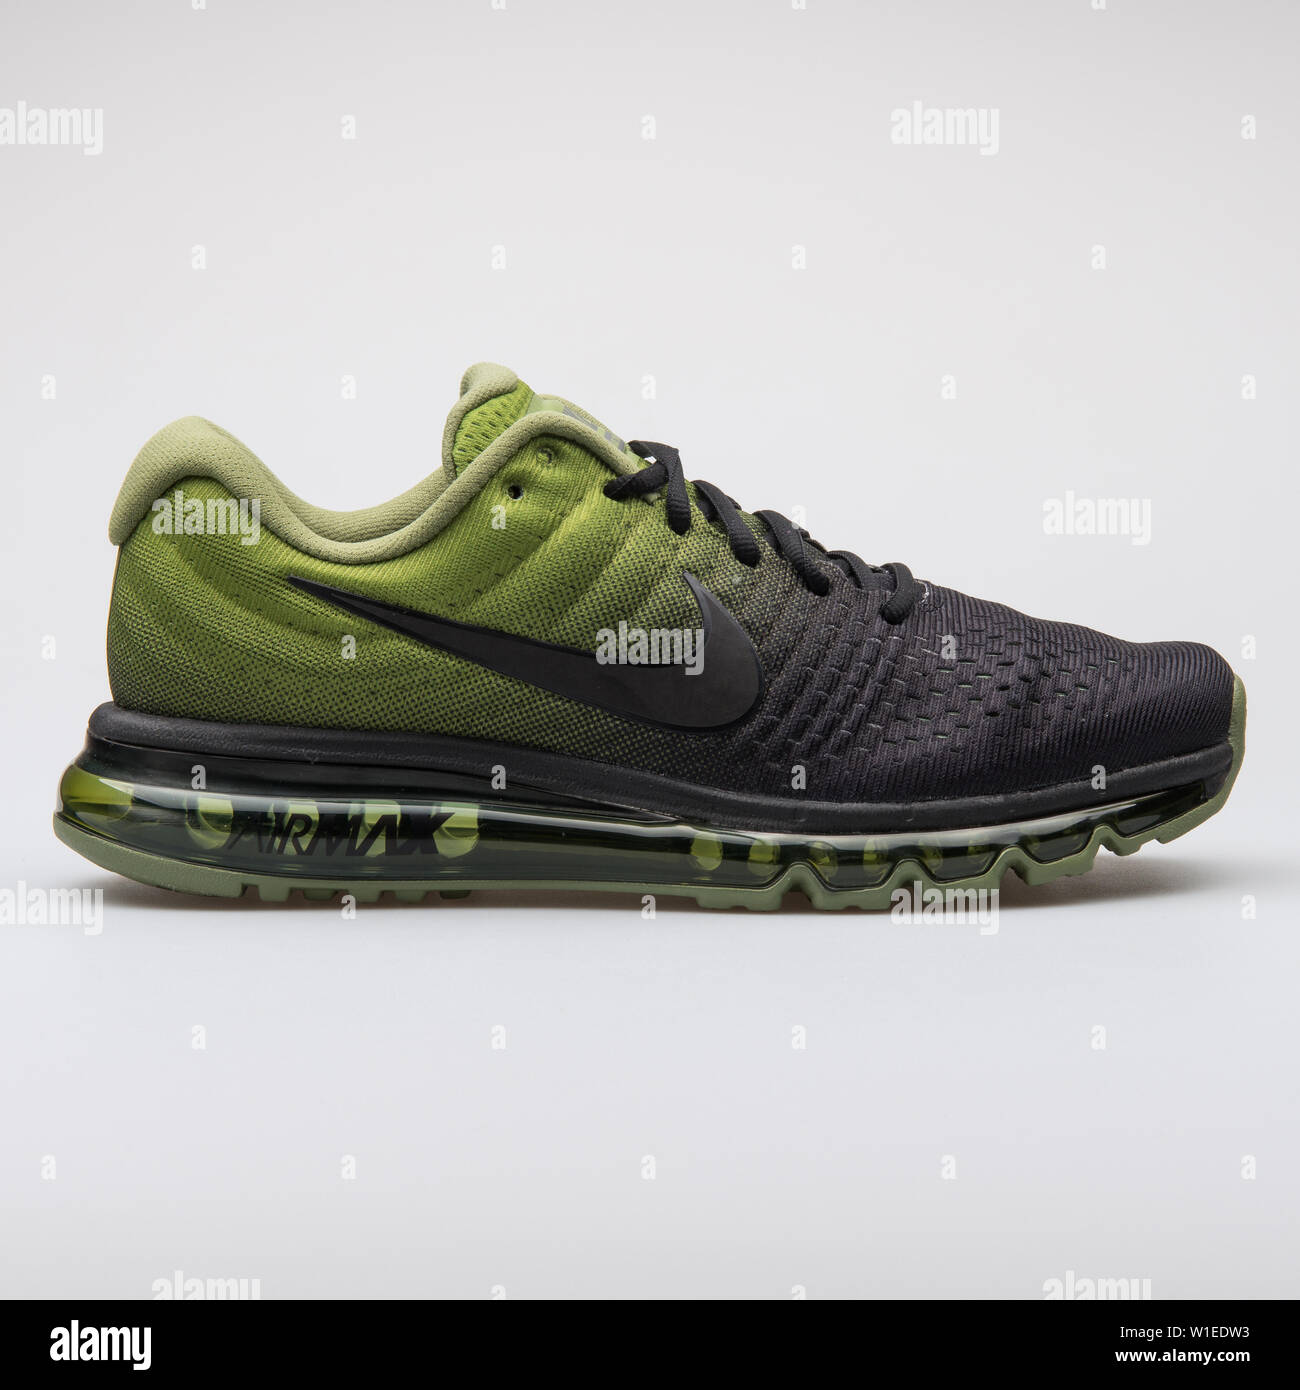 VIENNA, AUSTRIA - AUGUST 7, 2017: Nike Air Max 2017 green and black sneaker  on white background Stock Photo - Alamy